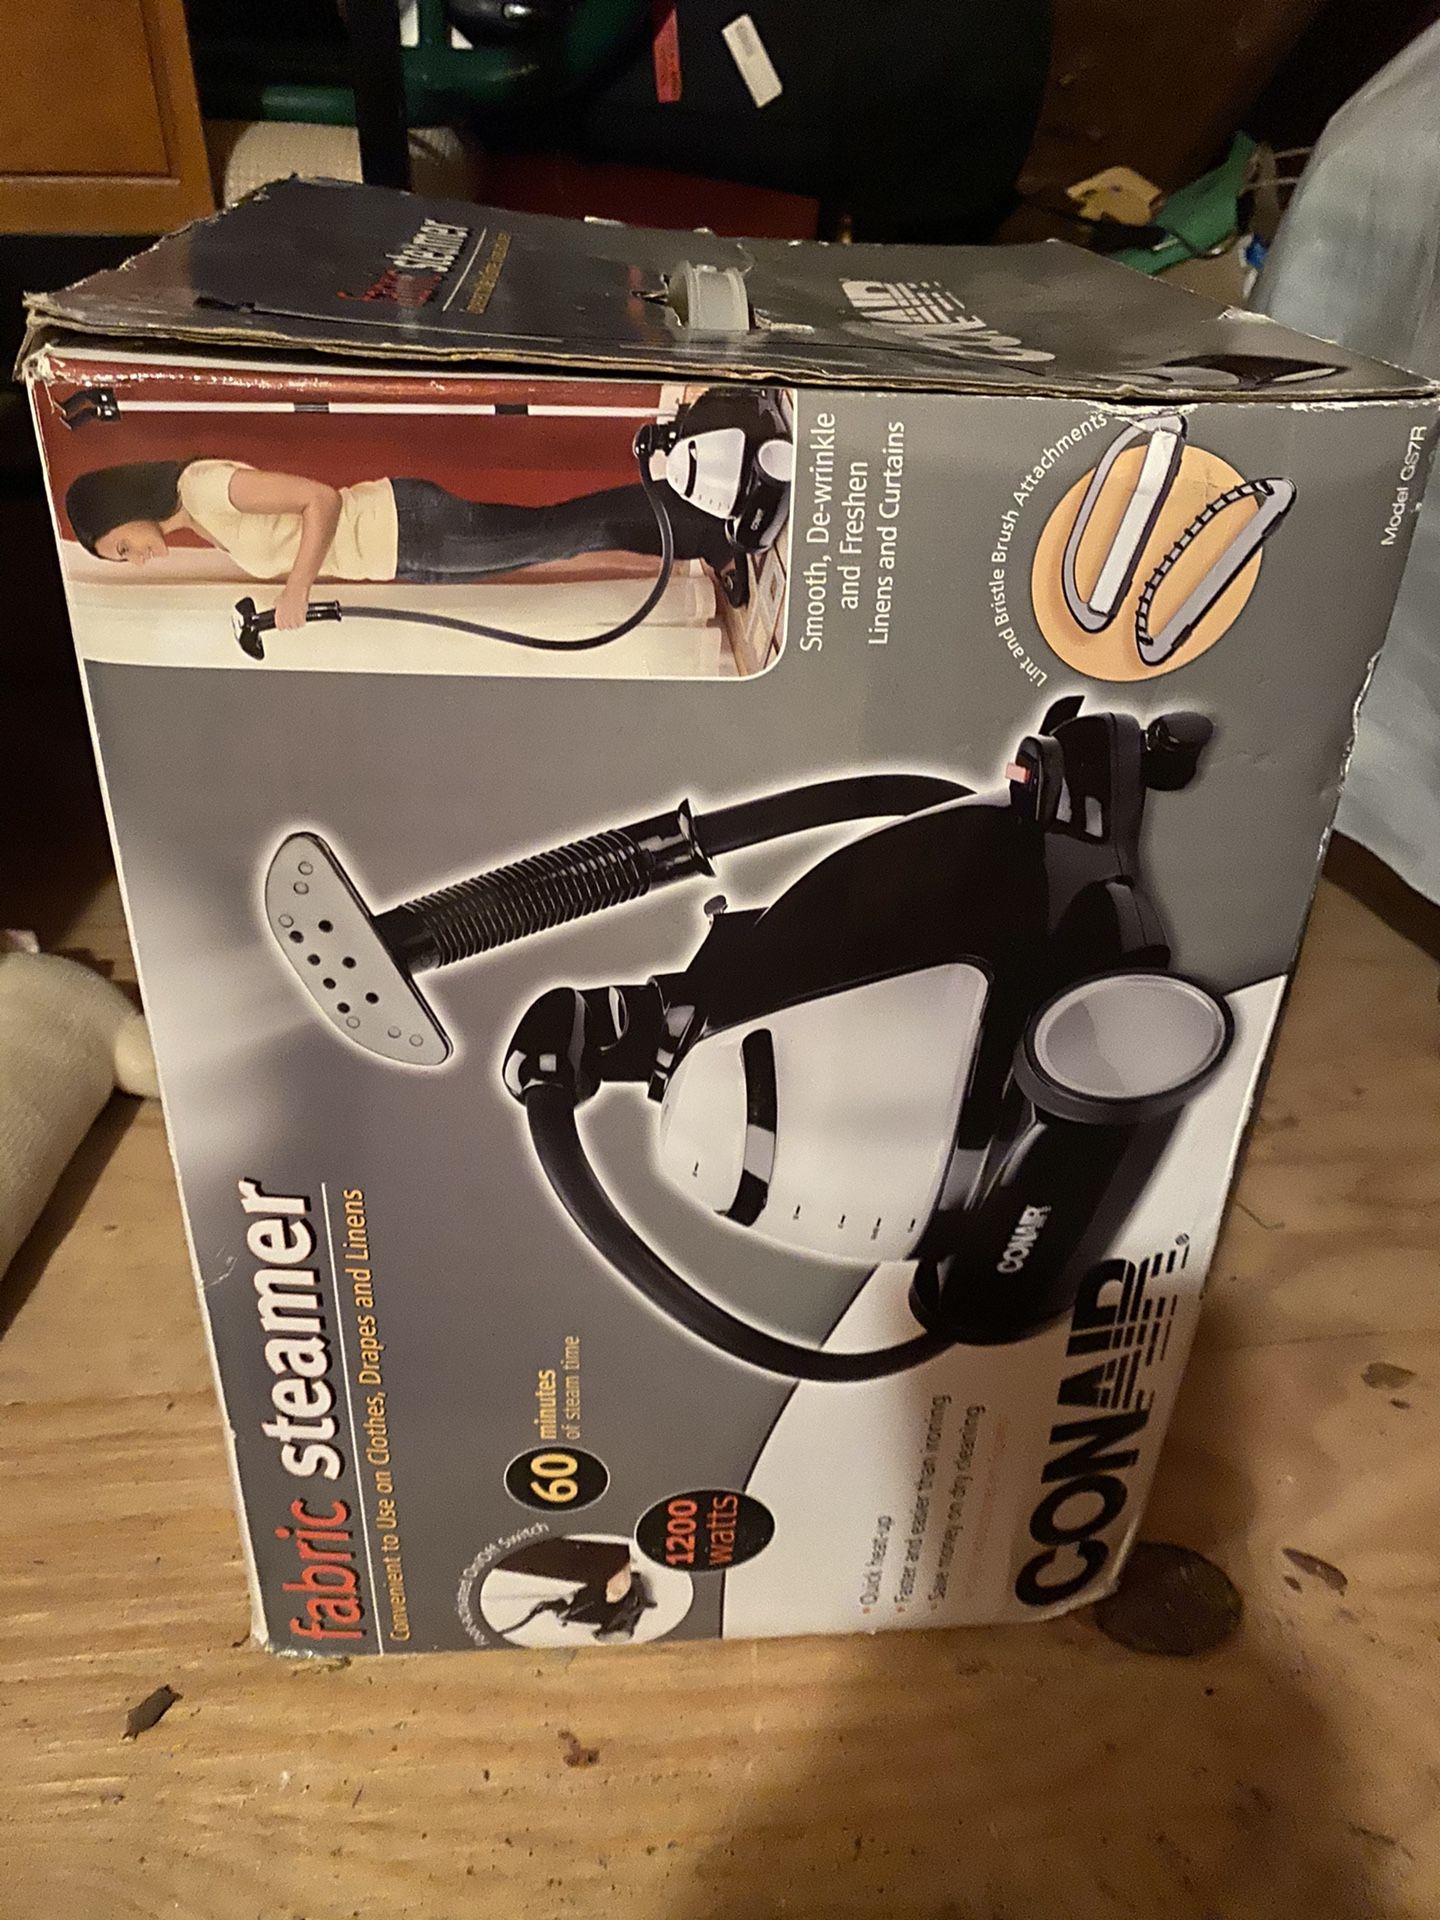 Con air fabric steamer unopened never used